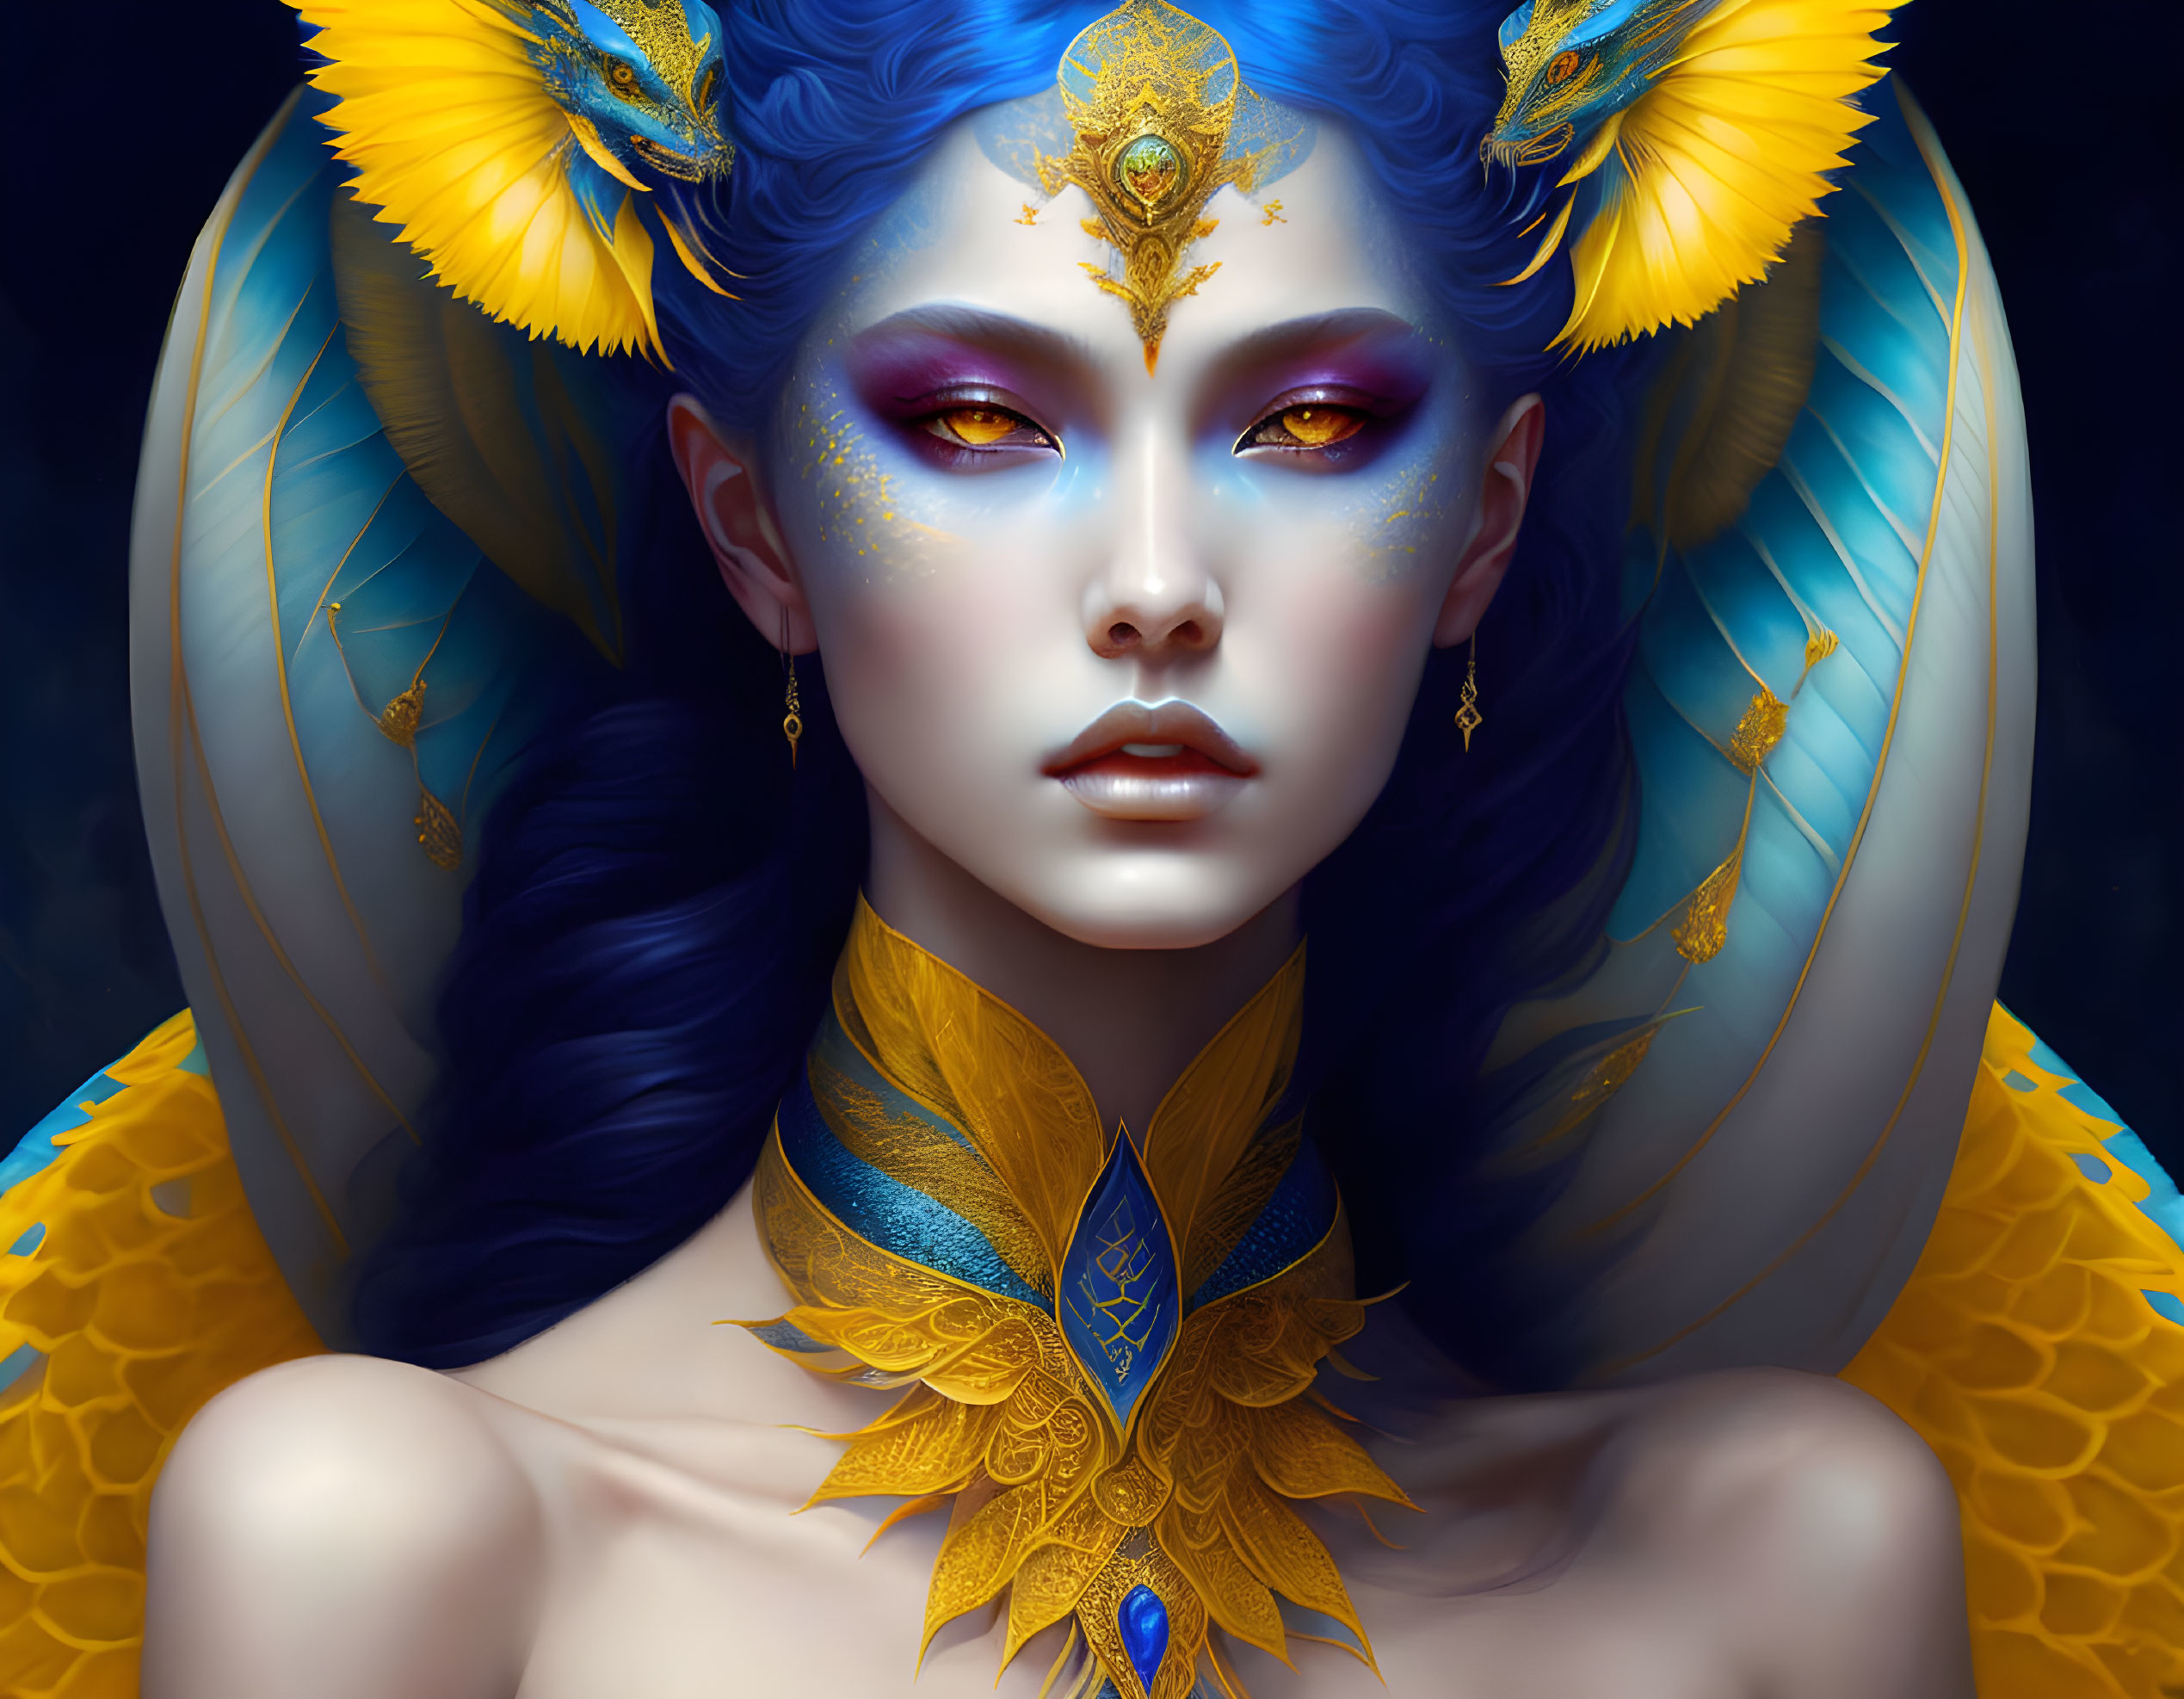 Blue-skinned female figure with yellow eyes and ornate golden jewelry resembling a mythical bird.